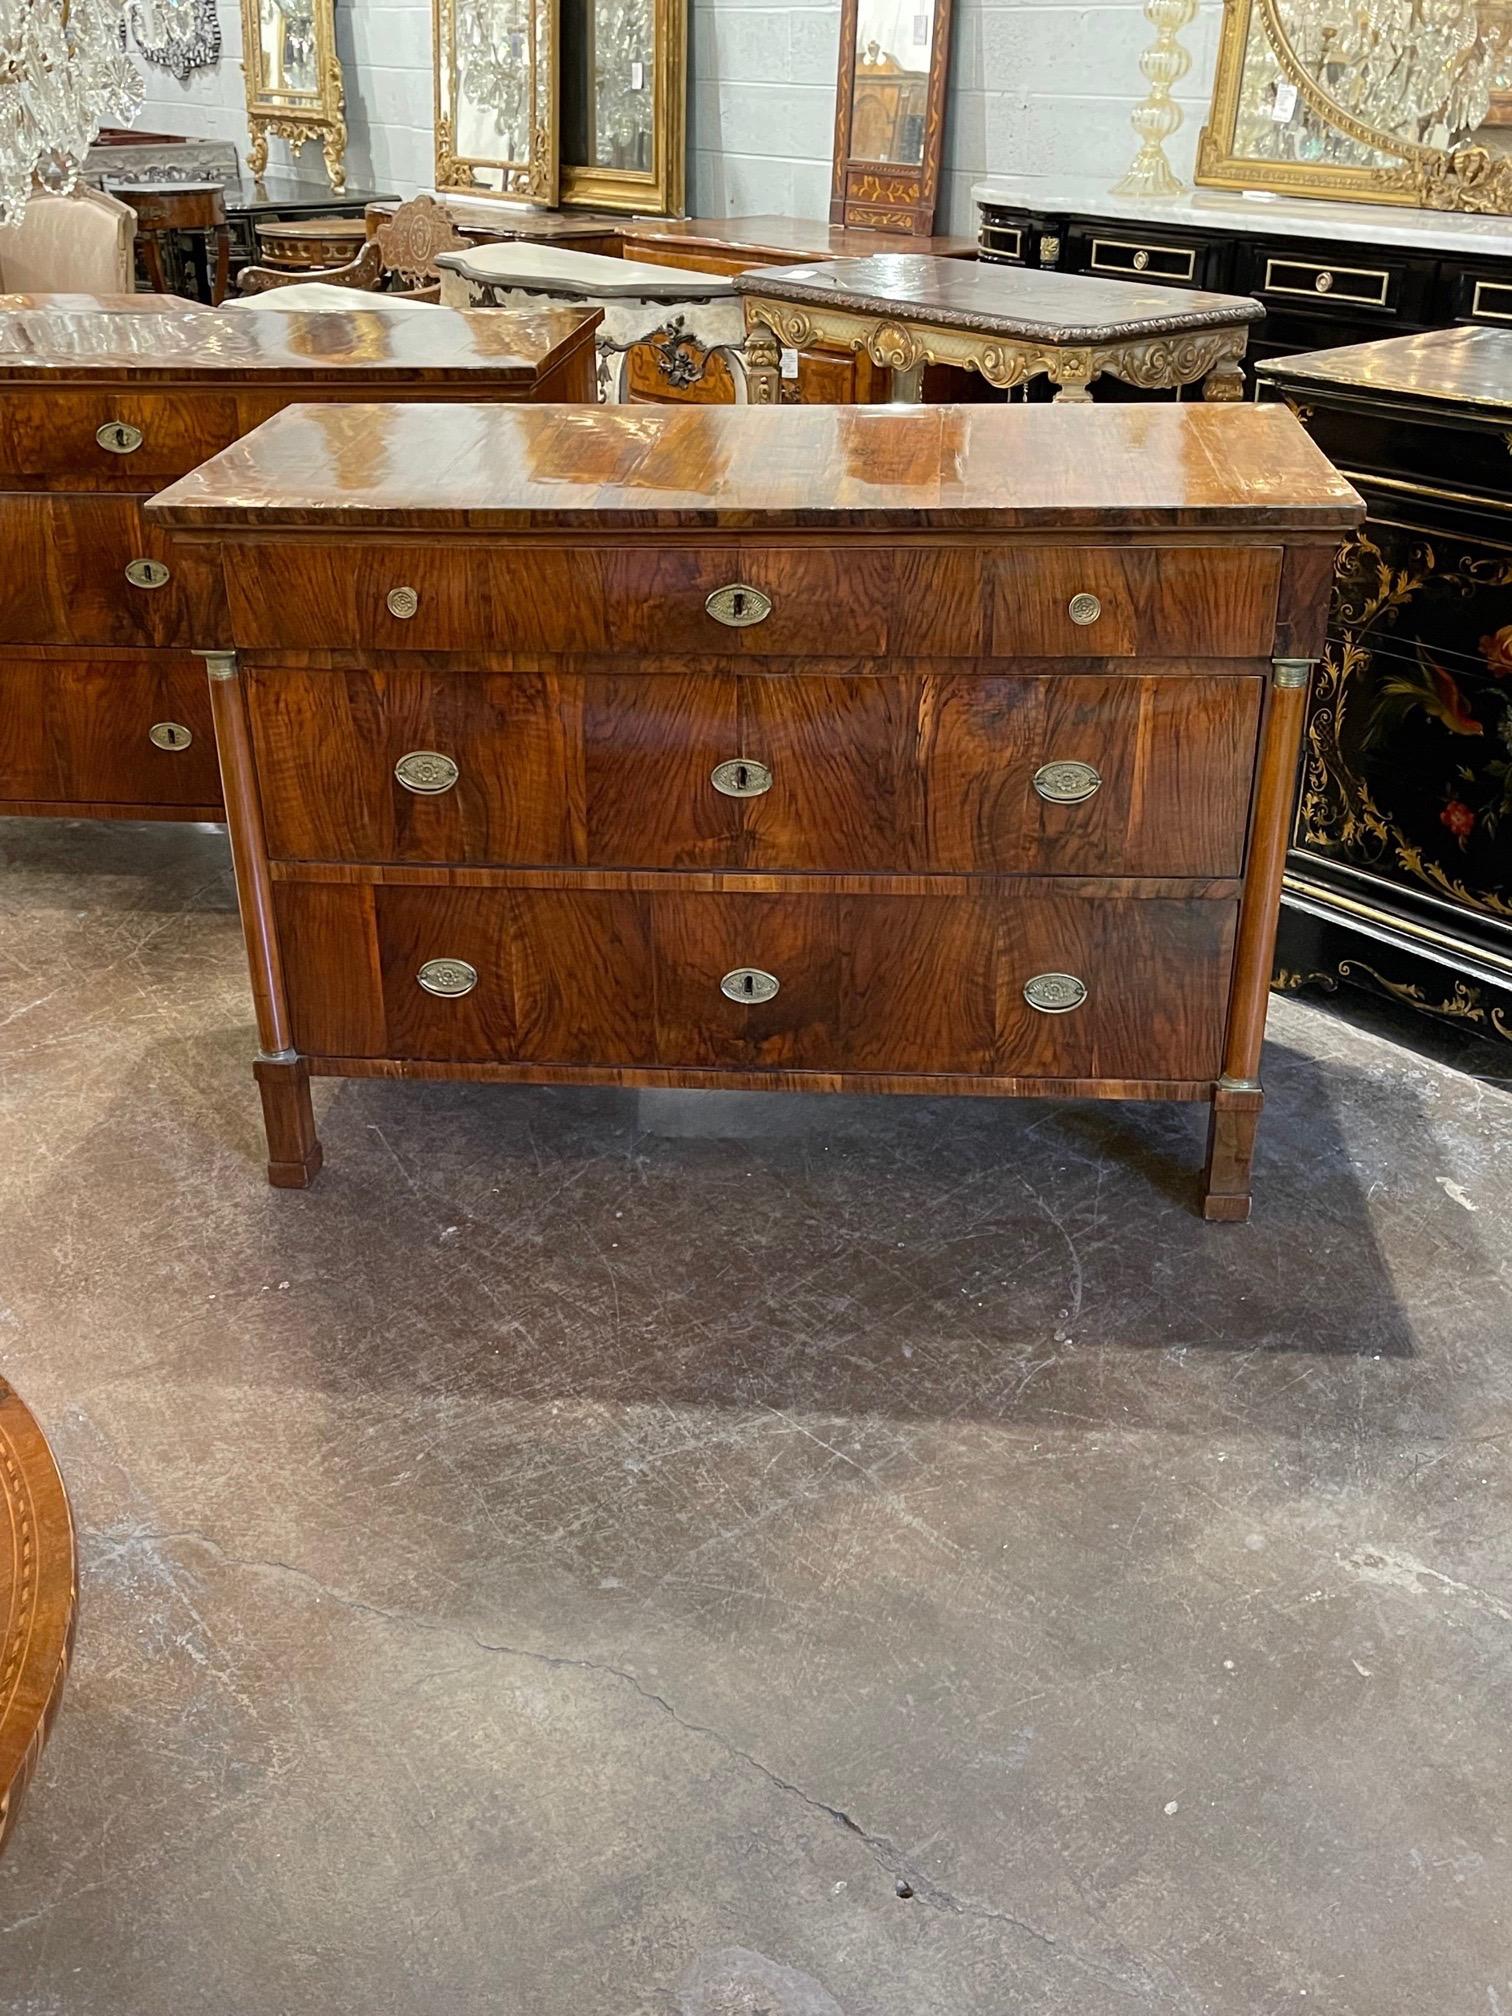 Exceptional pair of 19th century French Empire exotic black walnut commode. Gorgeous polished finish and beautiful clean lines. Very fine quality. Fabulous!!